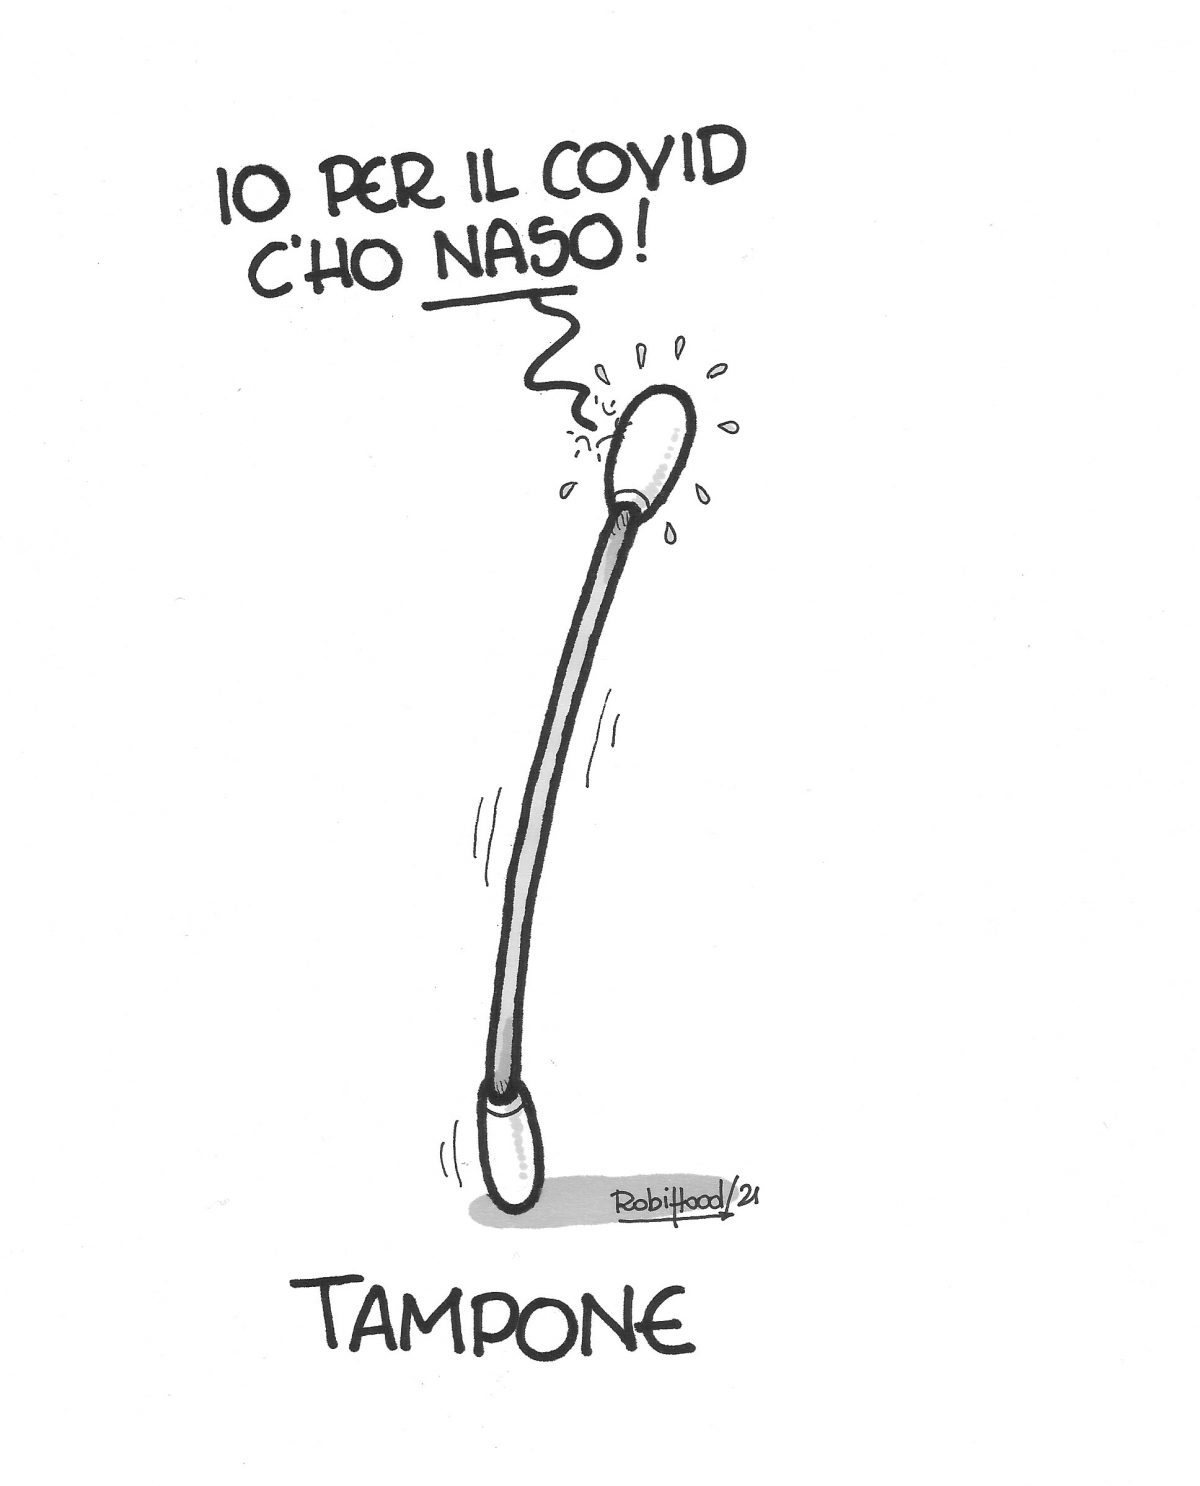 Tampone